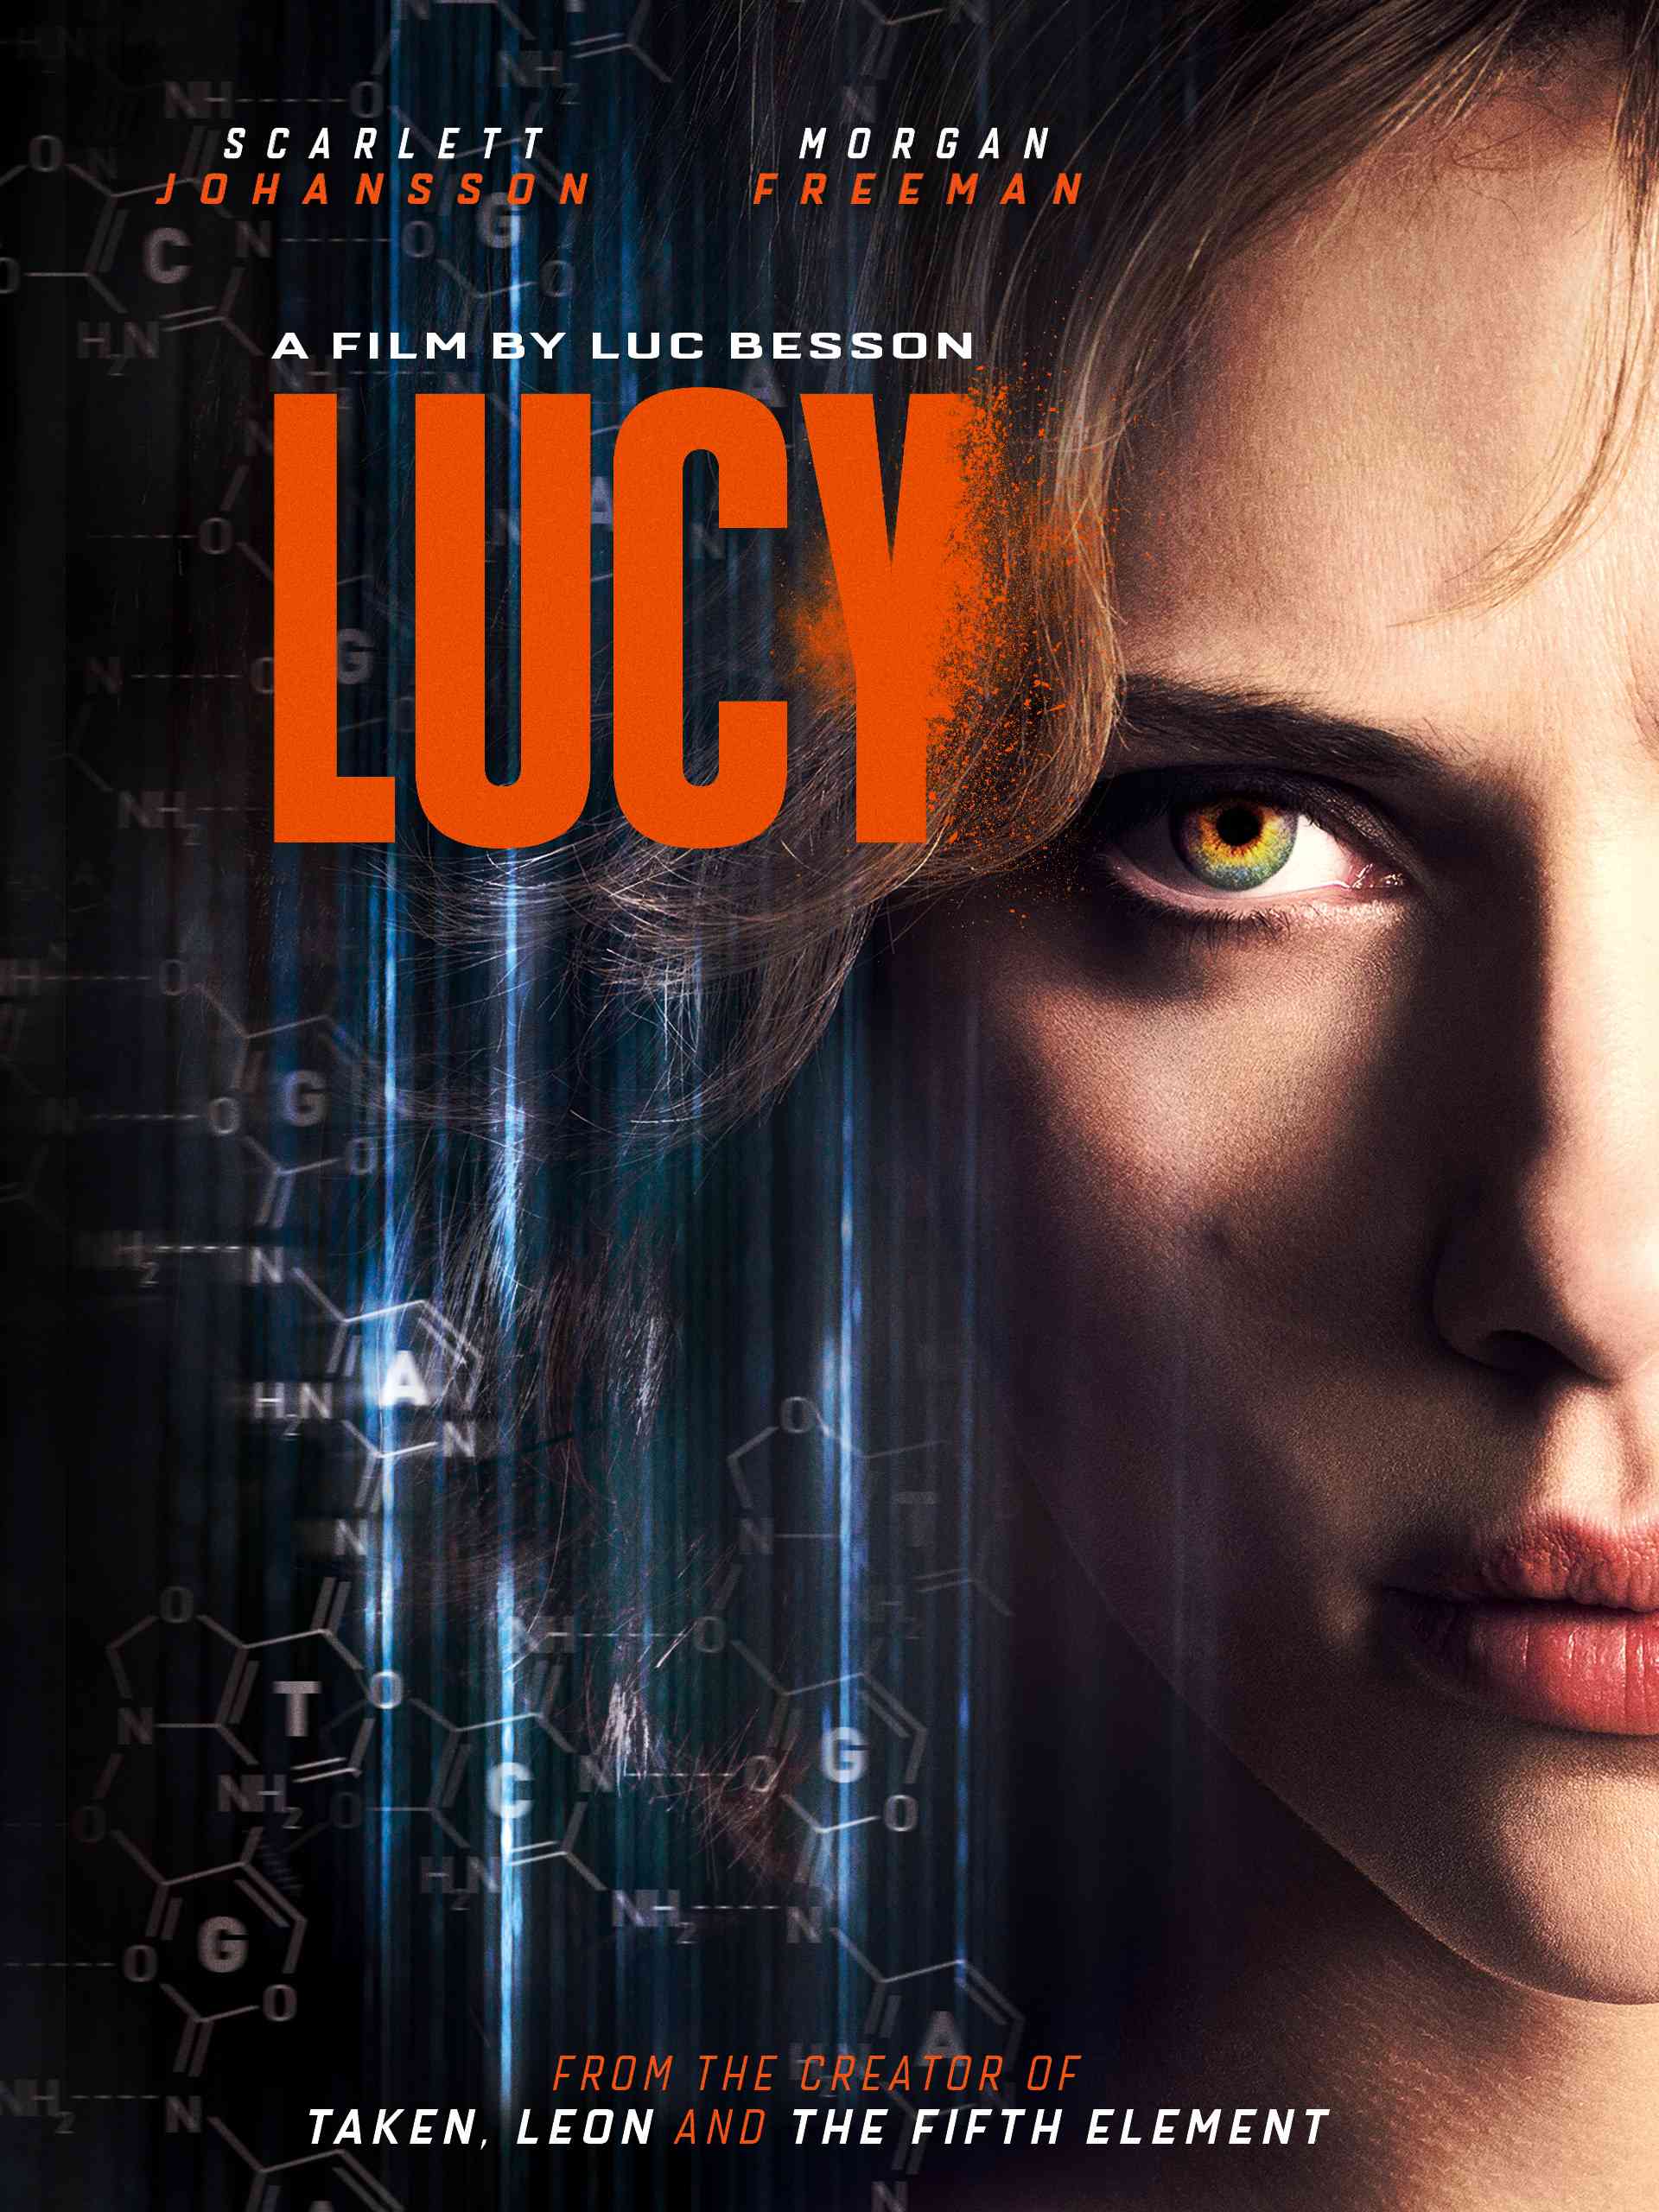 FULL MOVIE: Lucy (2014) [Action]